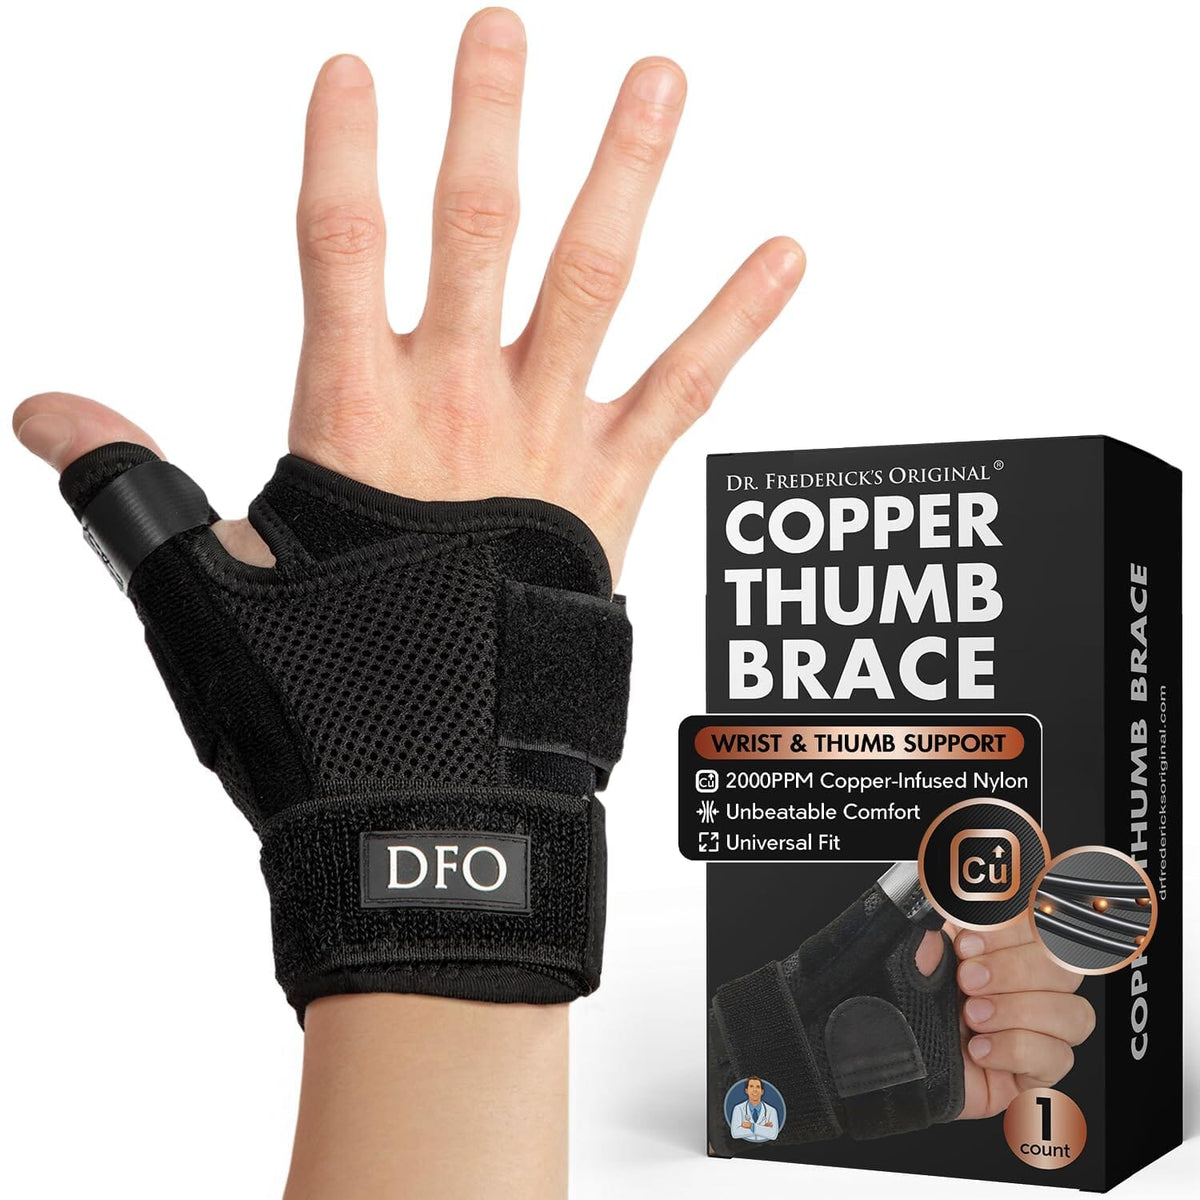 Dr. Frederick&#39;s Original Reversible Copper Infused Wrist Thumb Brace - 1 Brace - Spica Splint for De Quervain’s Tendonitis, Arthritis, CMC, Pain Relief - Left or Right Hand - Fits Men and Women Thumb and Wrist Pain Dr. Frederick&#39;s Original 